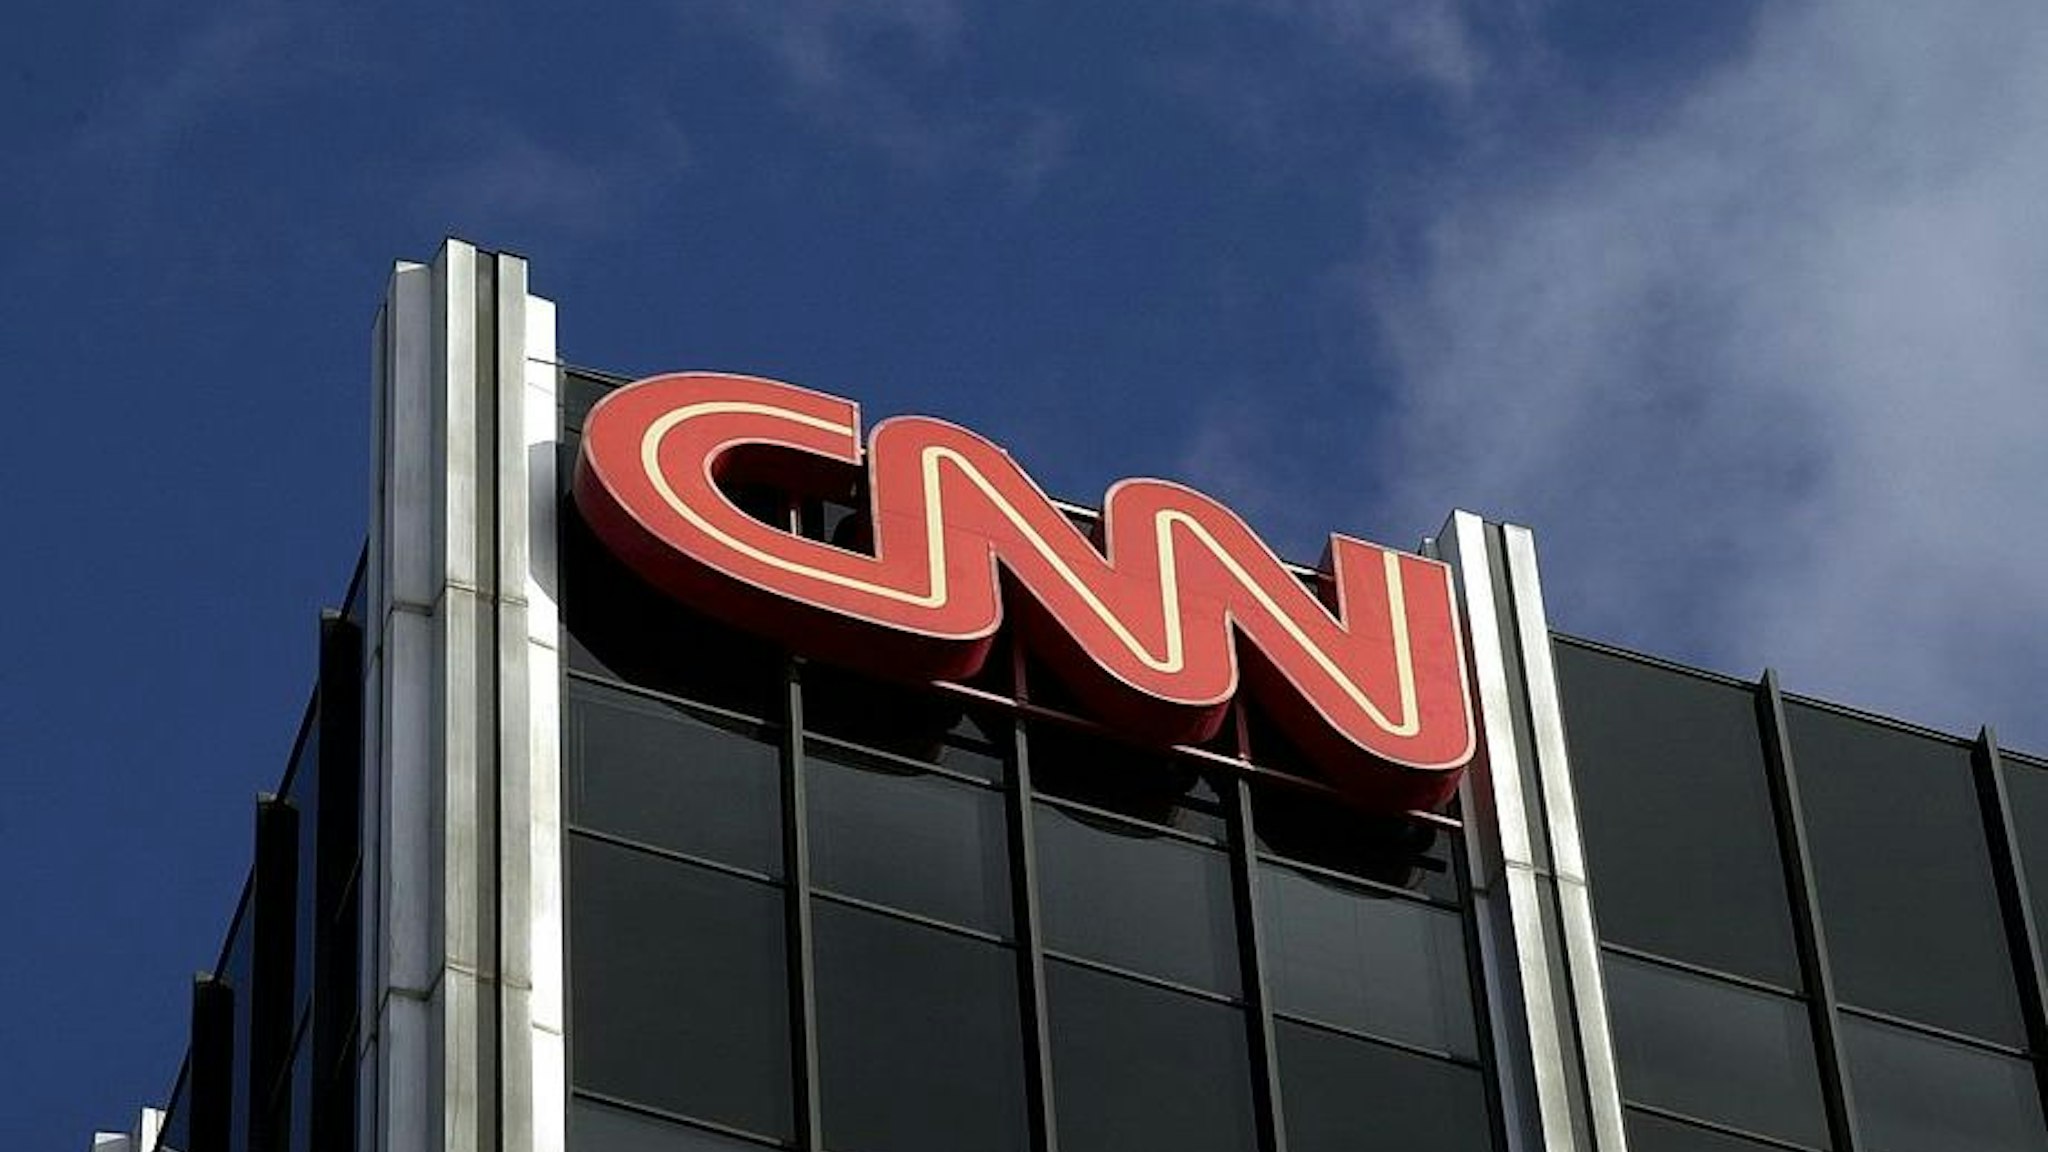 The Cable News Network (CNN) logo adorns the top of CNN's offices on the Sunset Strip, January 24, 2000 in Hollywood, CA. CNN was hit with job cuts earlier this week after CNN's parent company, Time-Warner, Inc., completed its merger with America Online, Inc.